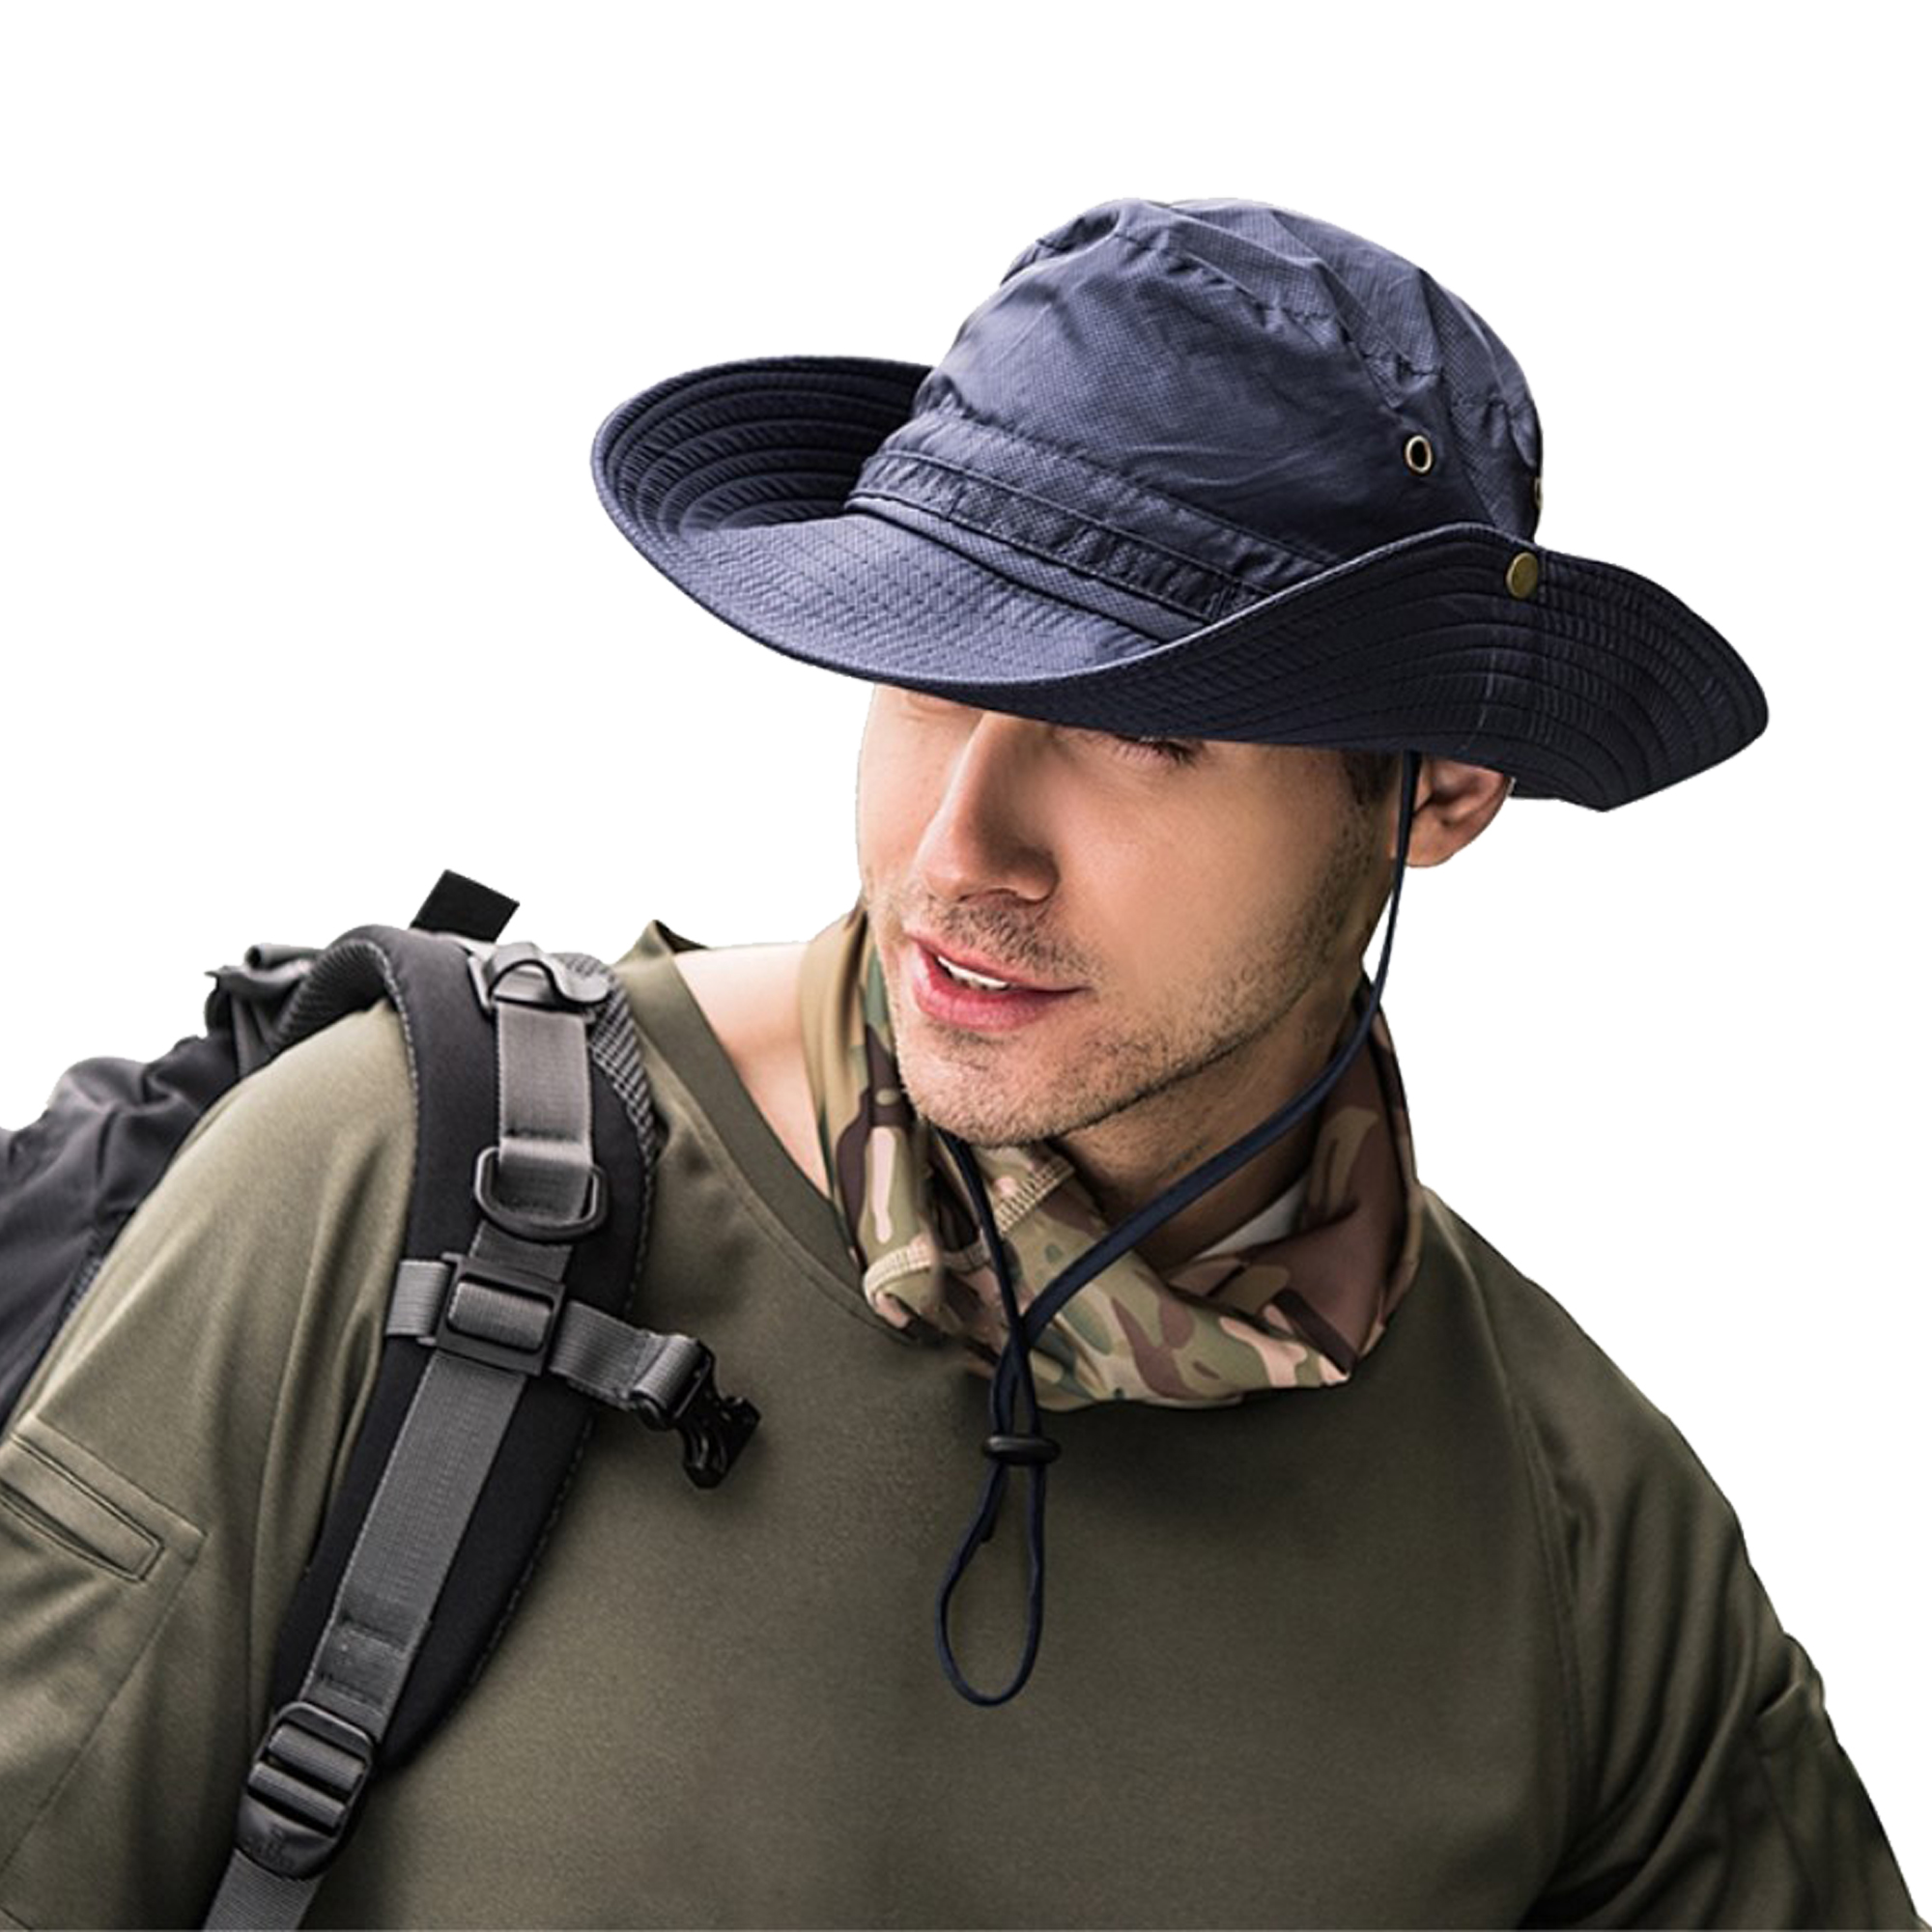 Nituyy Breathable Wide Brim Boonie Hat Outdoor Sun Protection Mesh Safari Cap - image 2 of 2